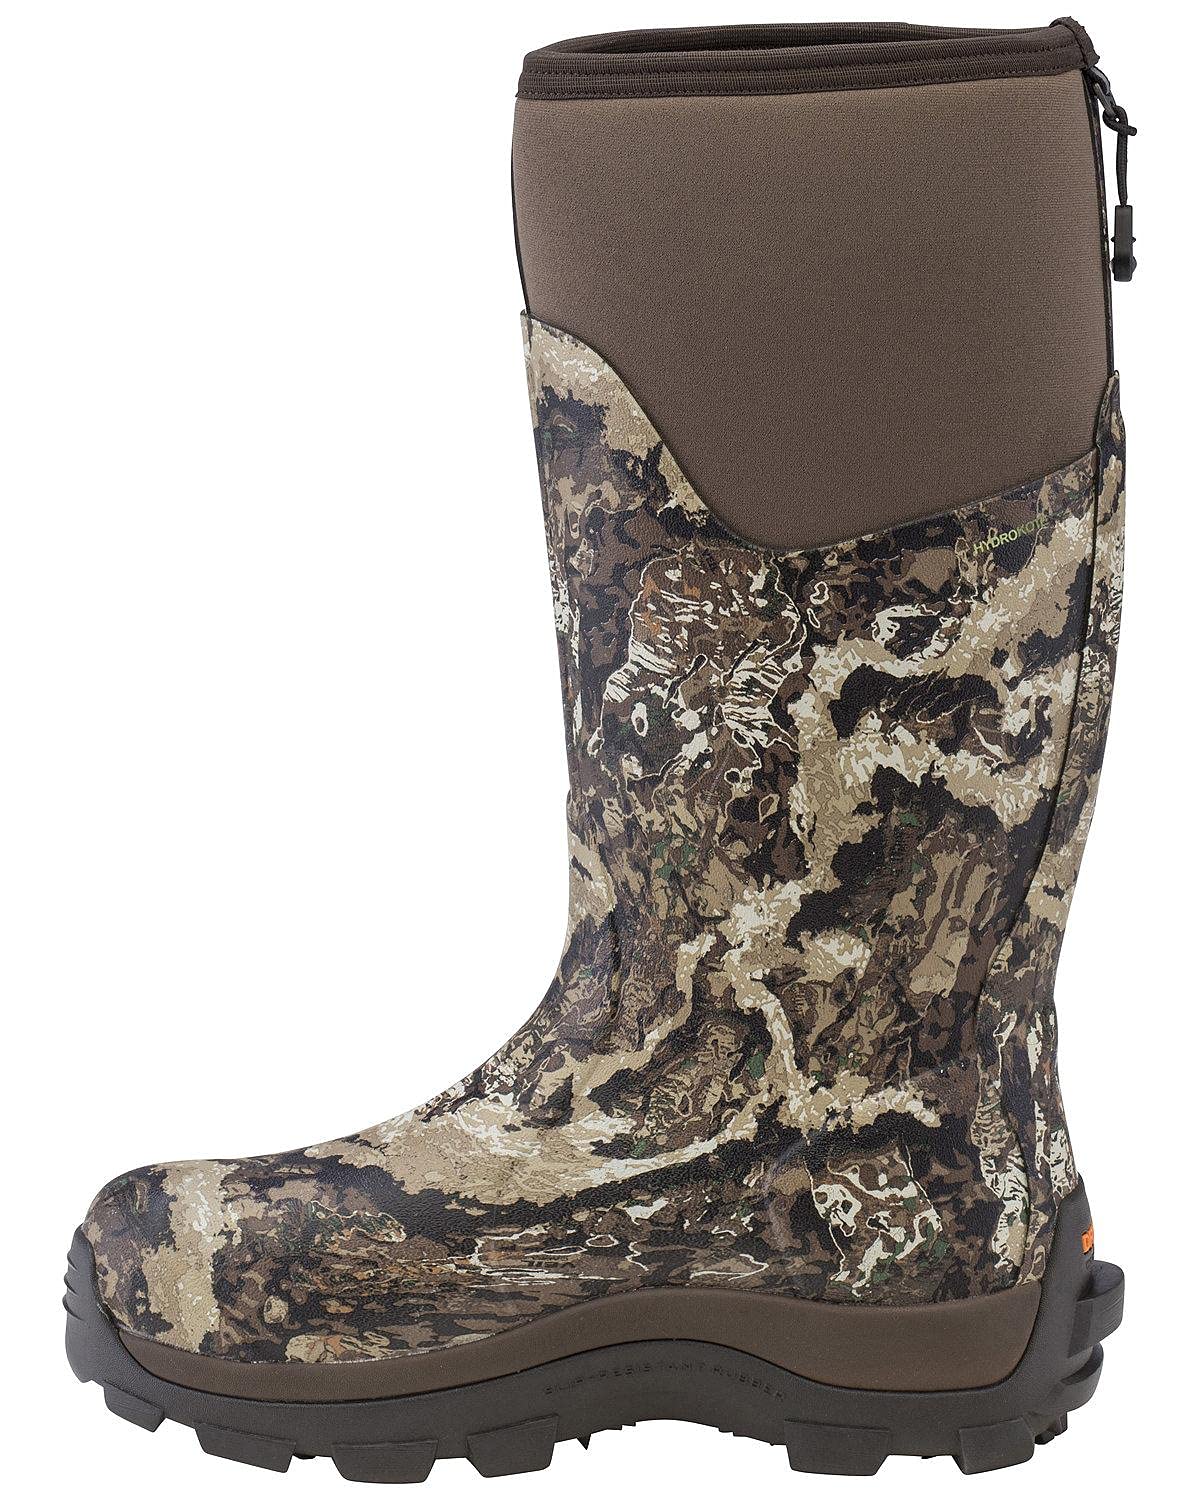 Dryshod Men's Southland Warm Weather Waterproof Camo Rubber Hunting Boot